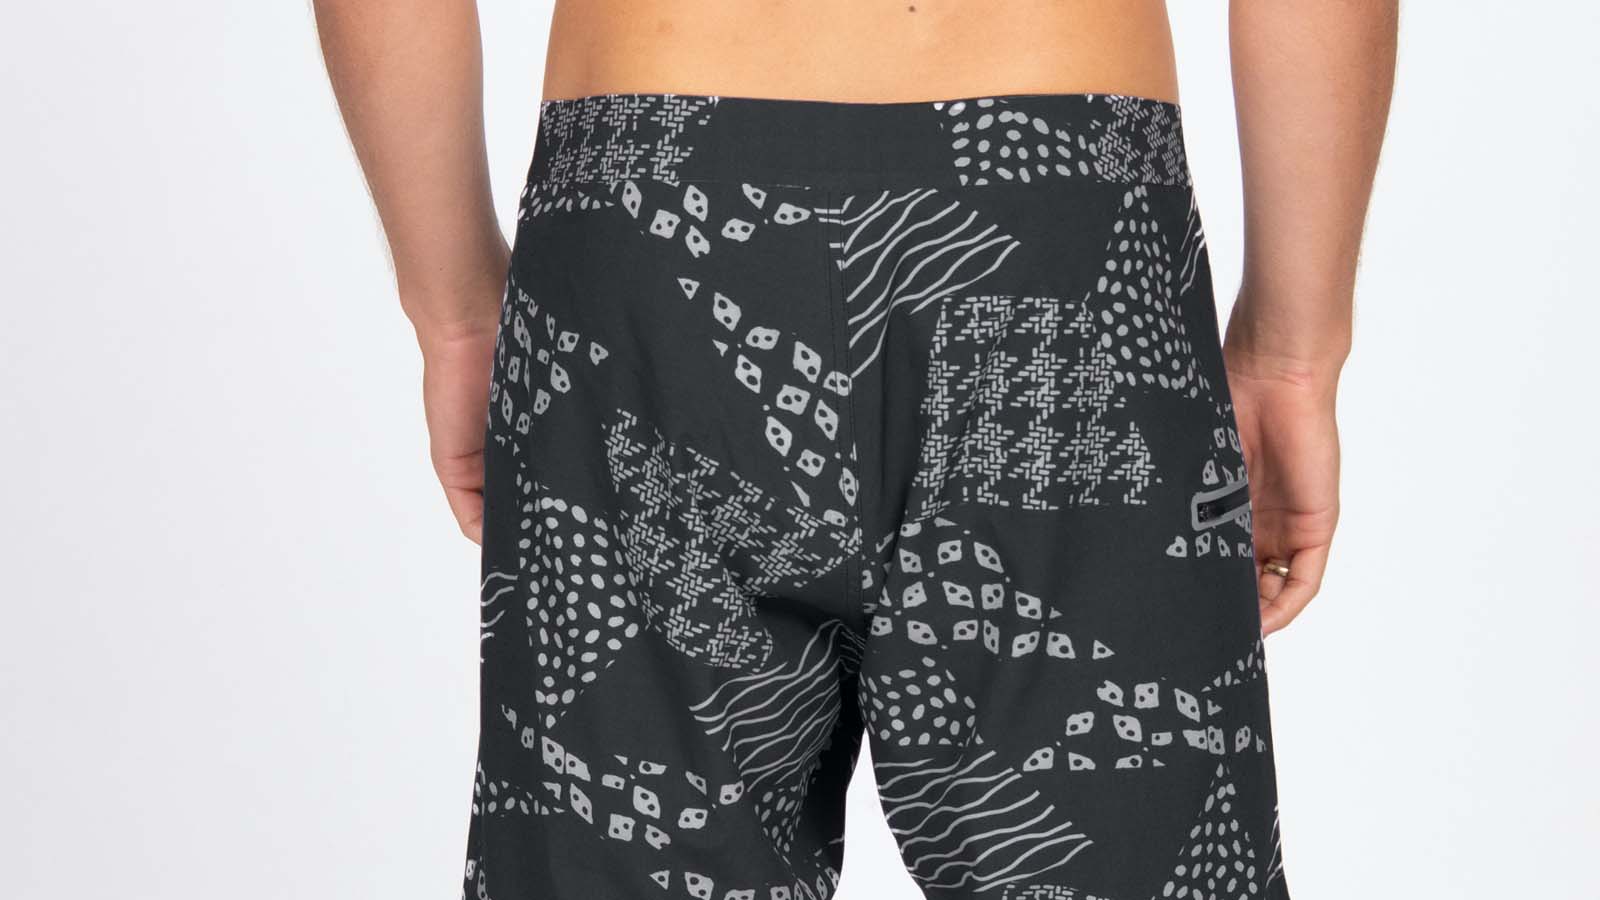 Rusty S/S 2022 Boardshorts Preview